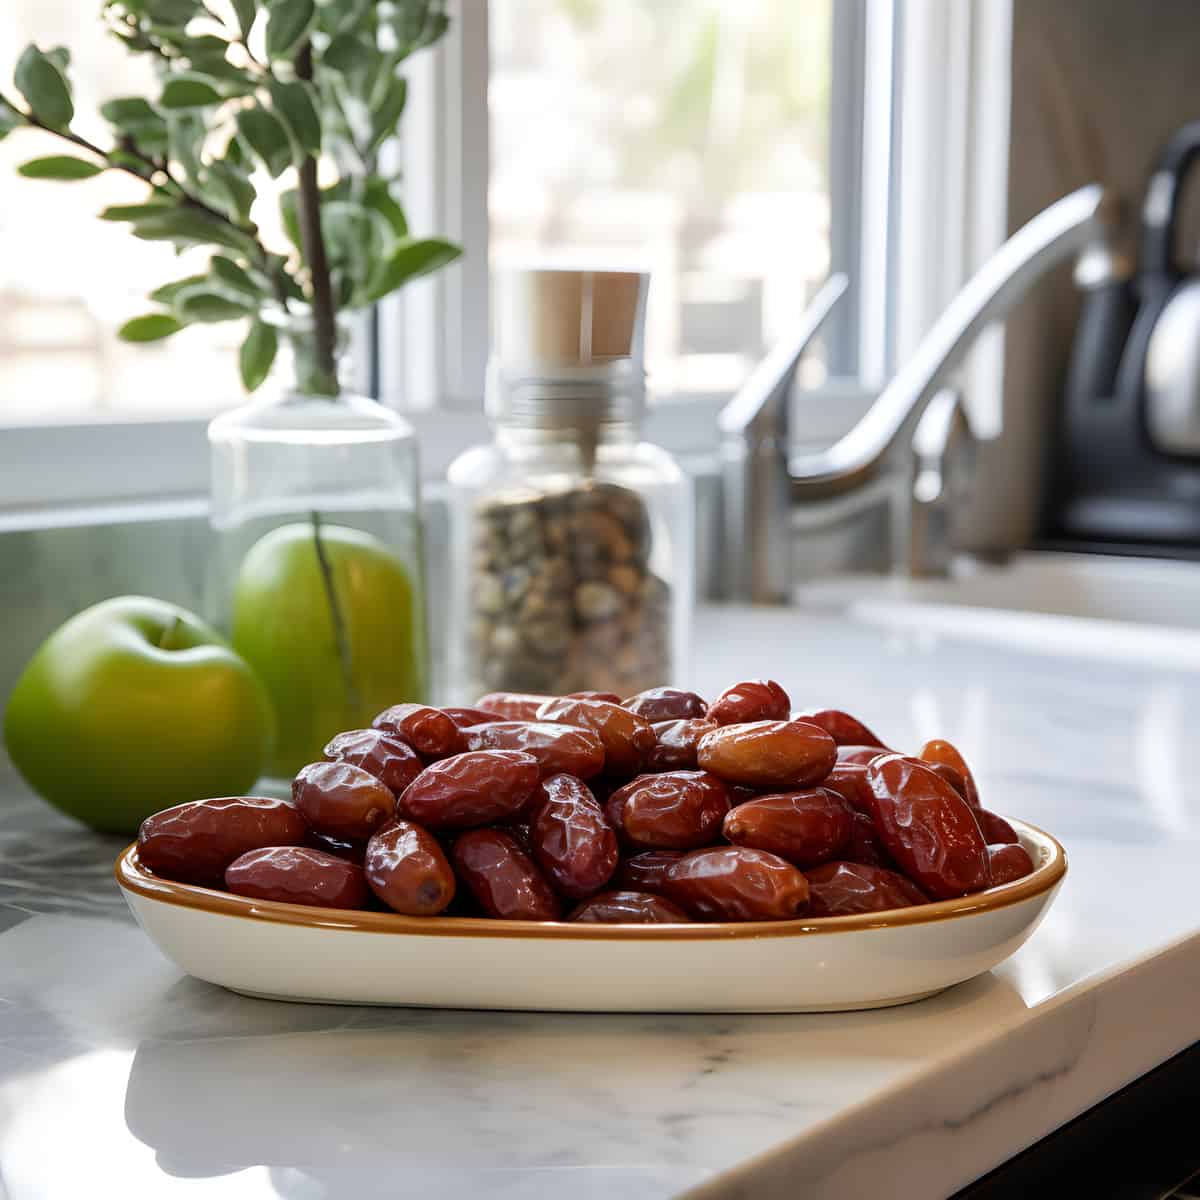 Jujube on a kitchen counter